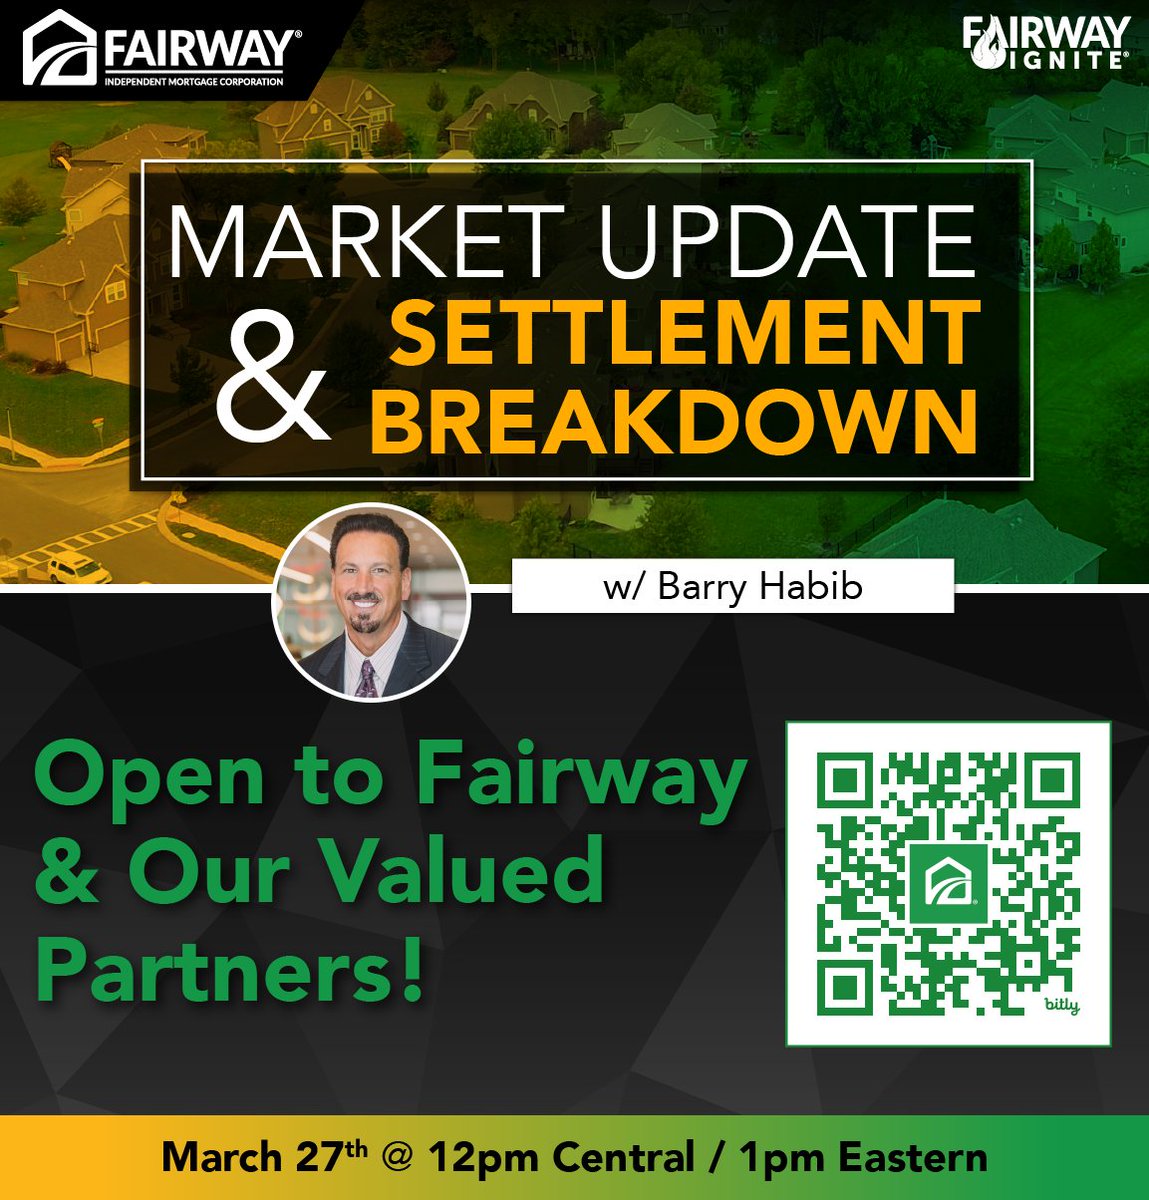 Join Fairway as we discuss the NAR settlement and marketing updates with Barry Habib, CEO of MBS Highway. 
#FairwayNation #mortgagewhisperer 

Wednesday, March 27th 
12 p.m. CST/1 p.m. EST

Register here: bit.ly/4amsvPZ